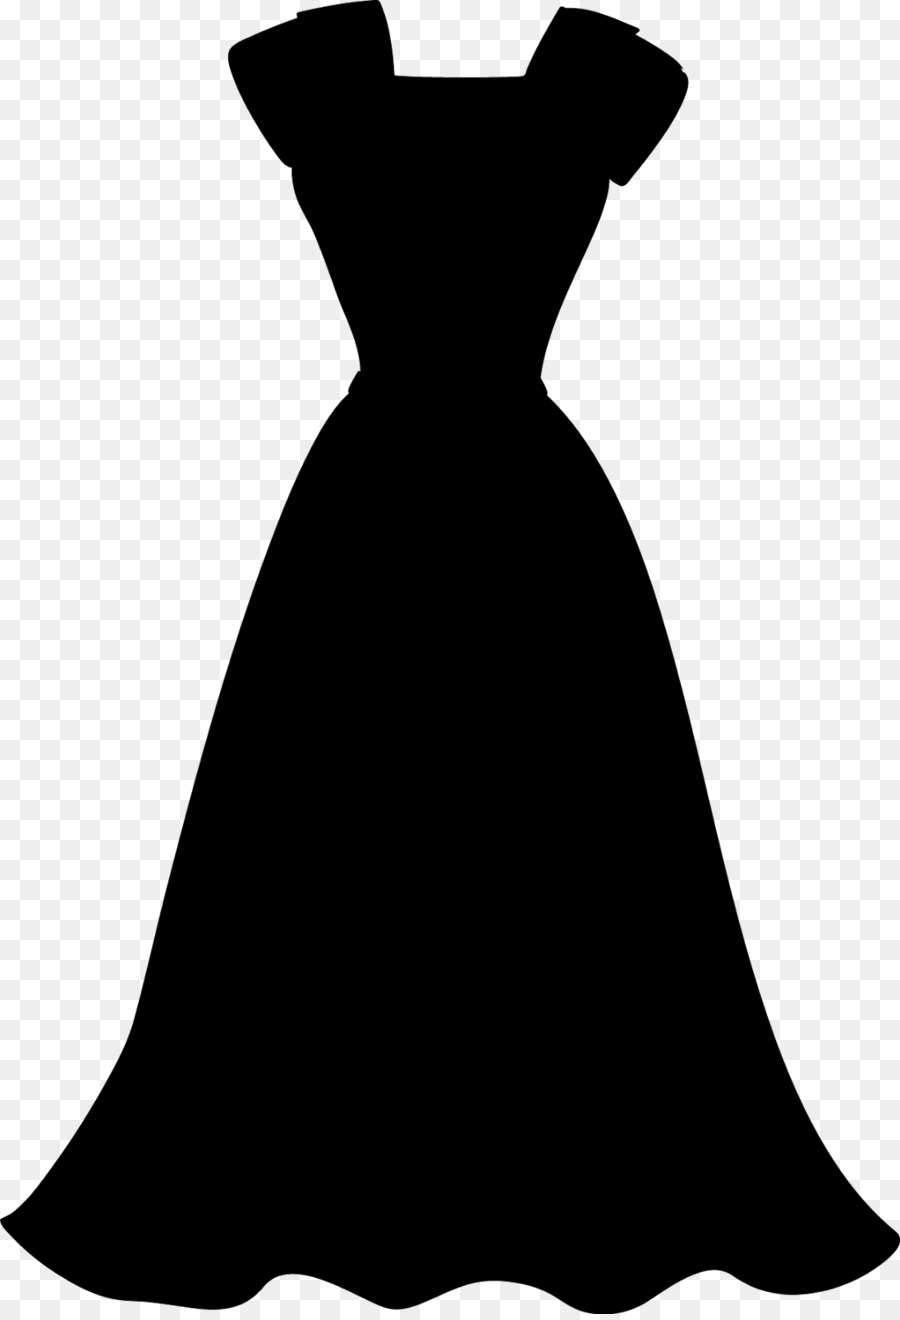 Black & White - M Gown Clip art Silhouette Neck -  png download - 1096*1600 - Free Transparent Black  White  M png Download.